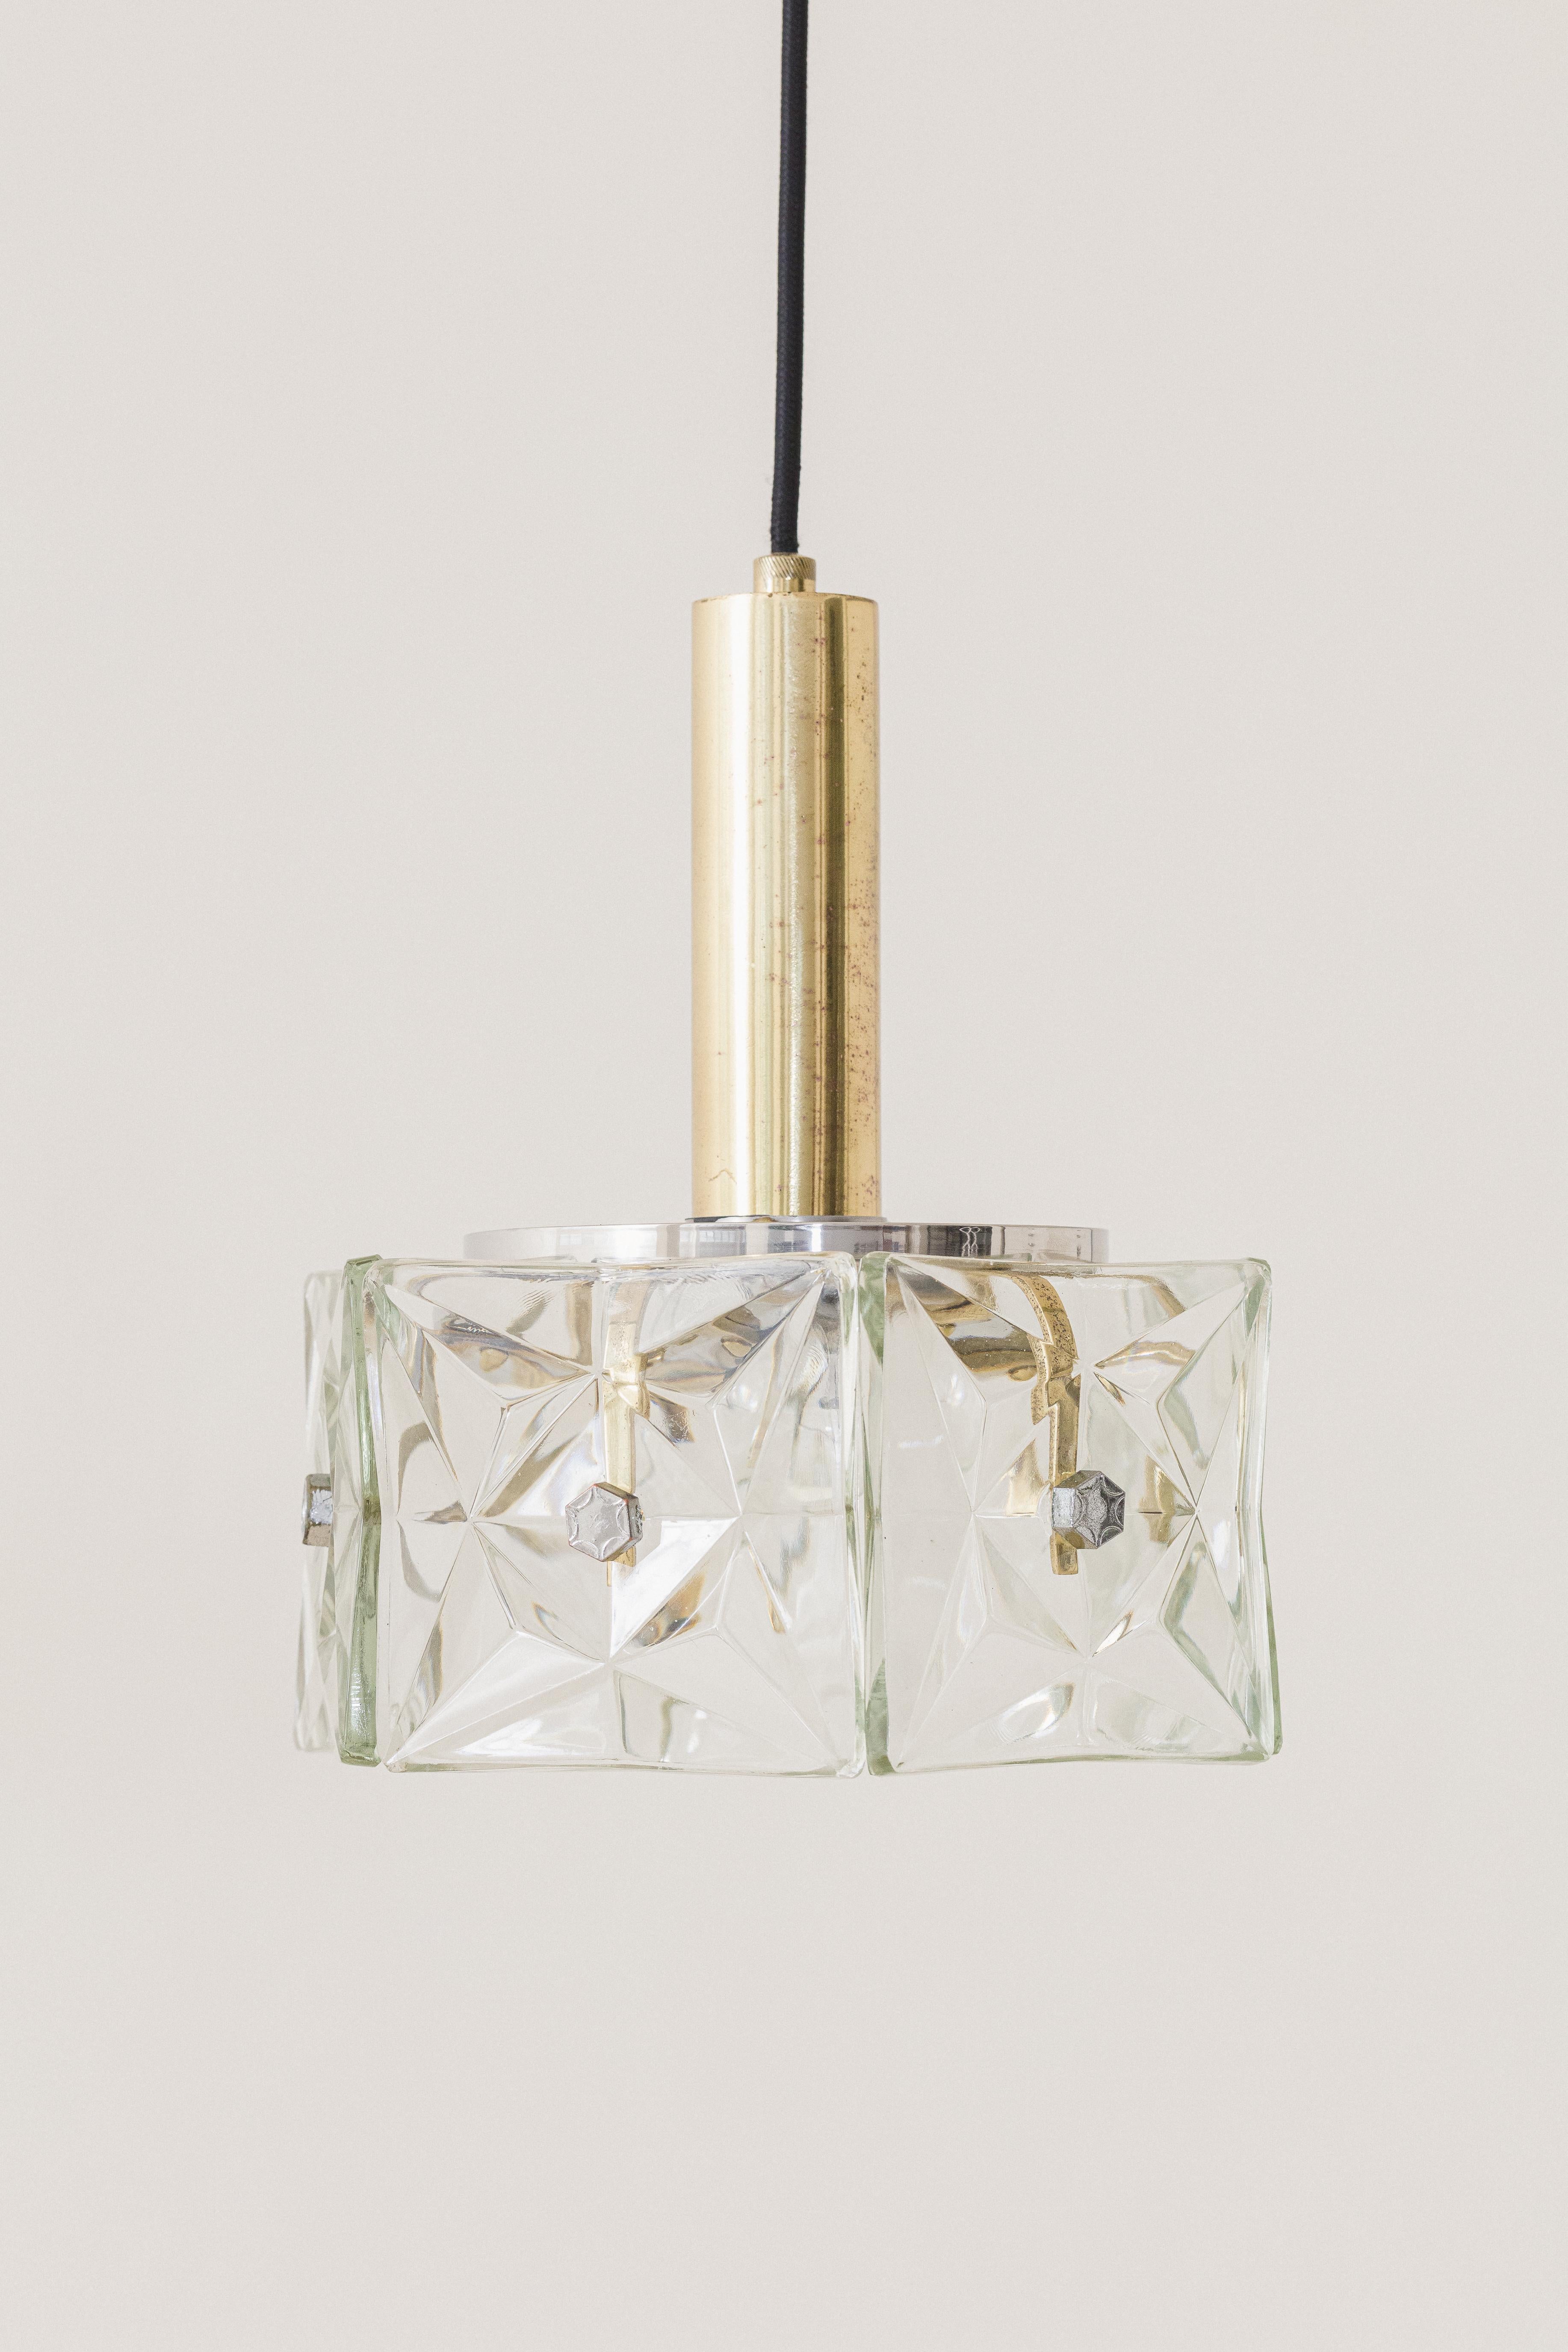 Mid-20th Century Vintage Pendant Lamp by Lustres Pelotas, Brass and Prismatic Glass, Brazil 1950s For Sale